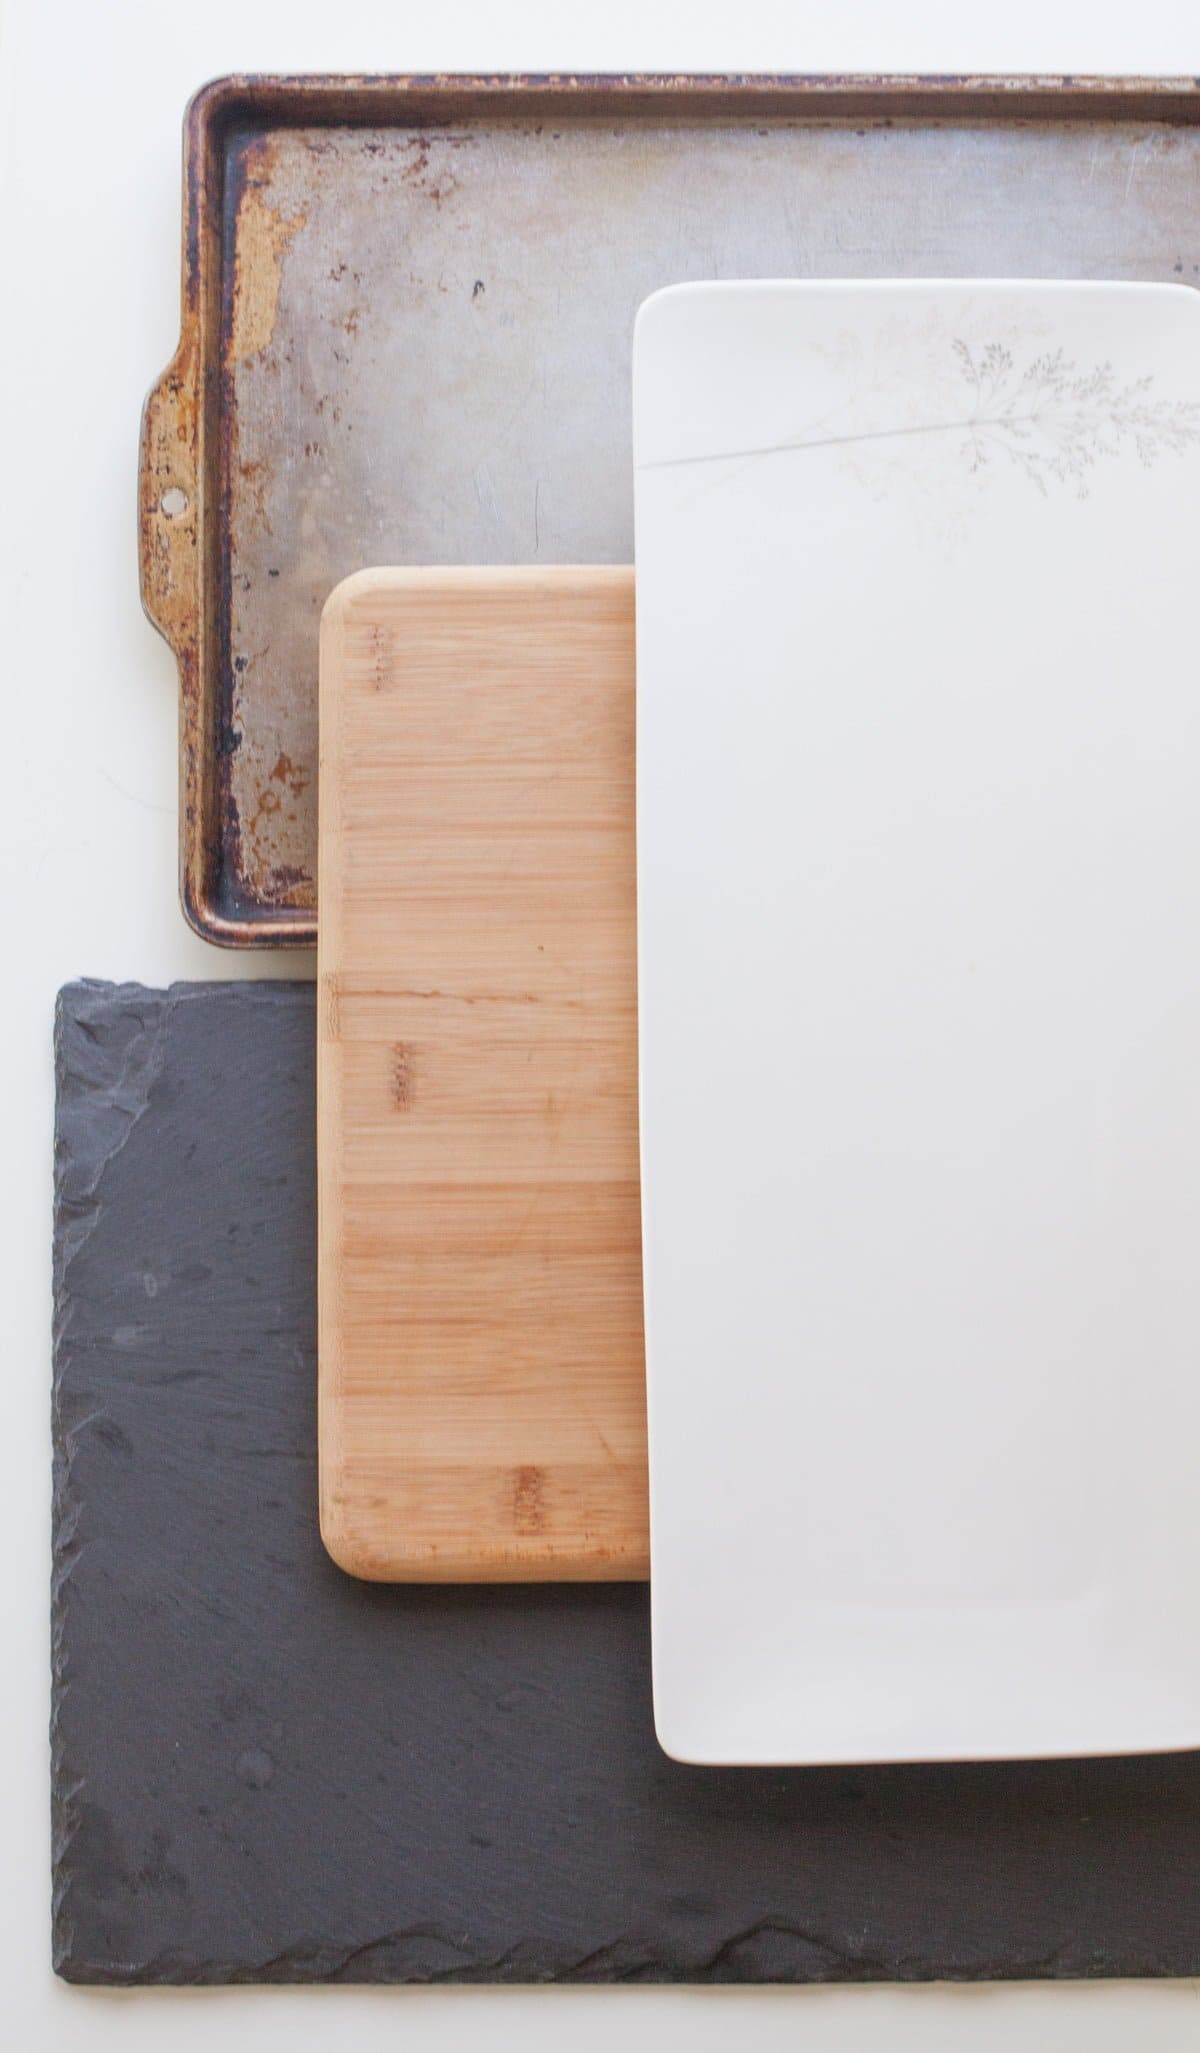 How To Make An Awesome Cheese Board In Minutes Wholefully - 